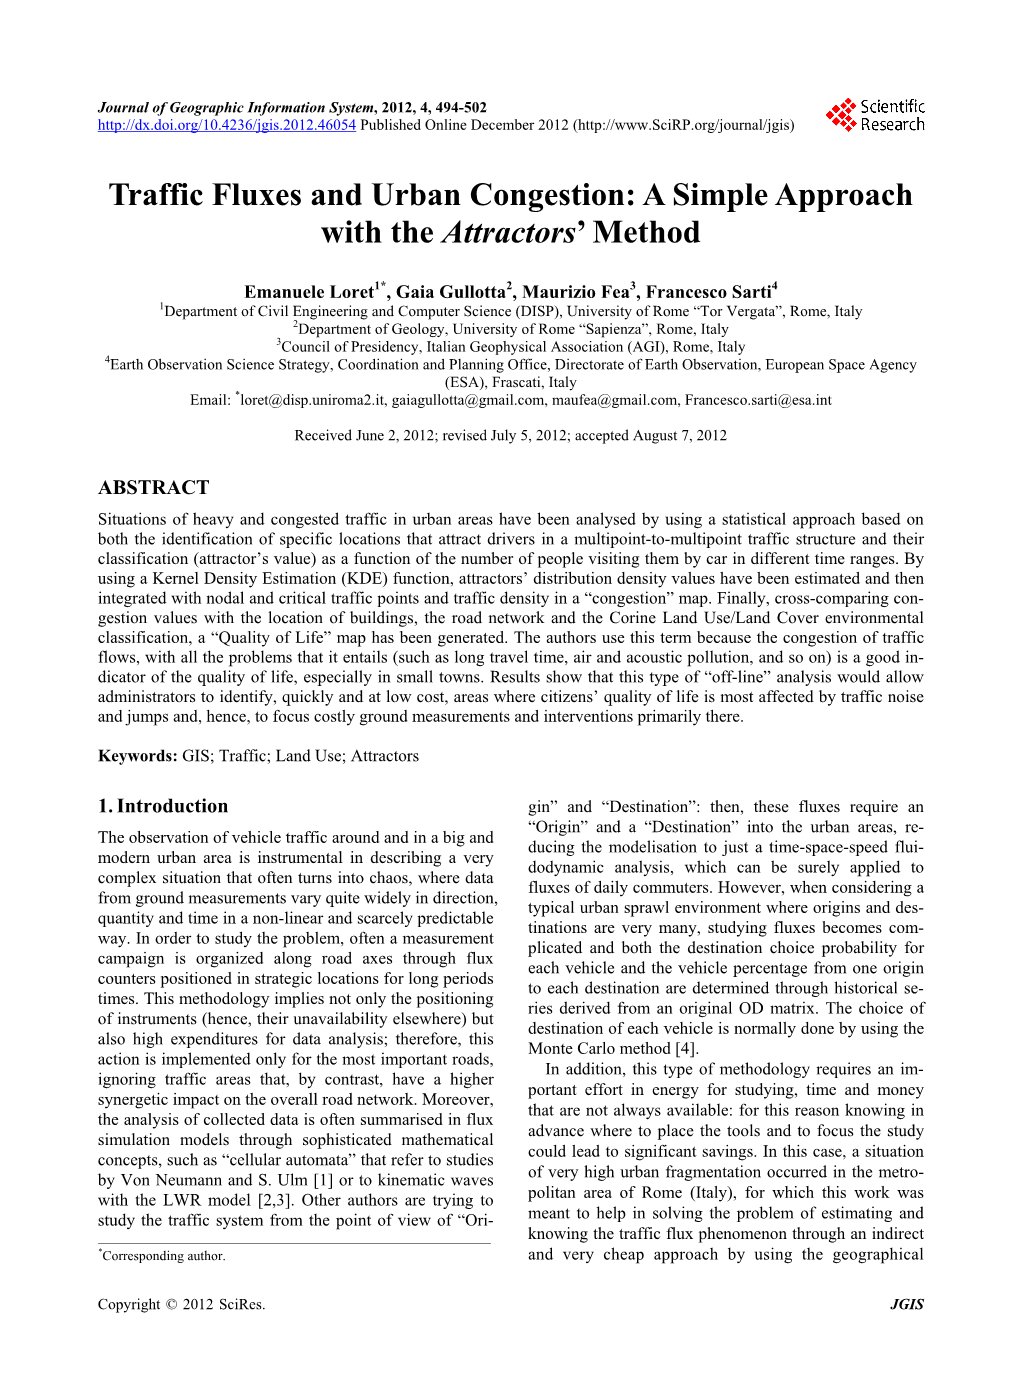 Traffic Fluxes and Urban Congestion: a Simple Approach with the Attractors' Method